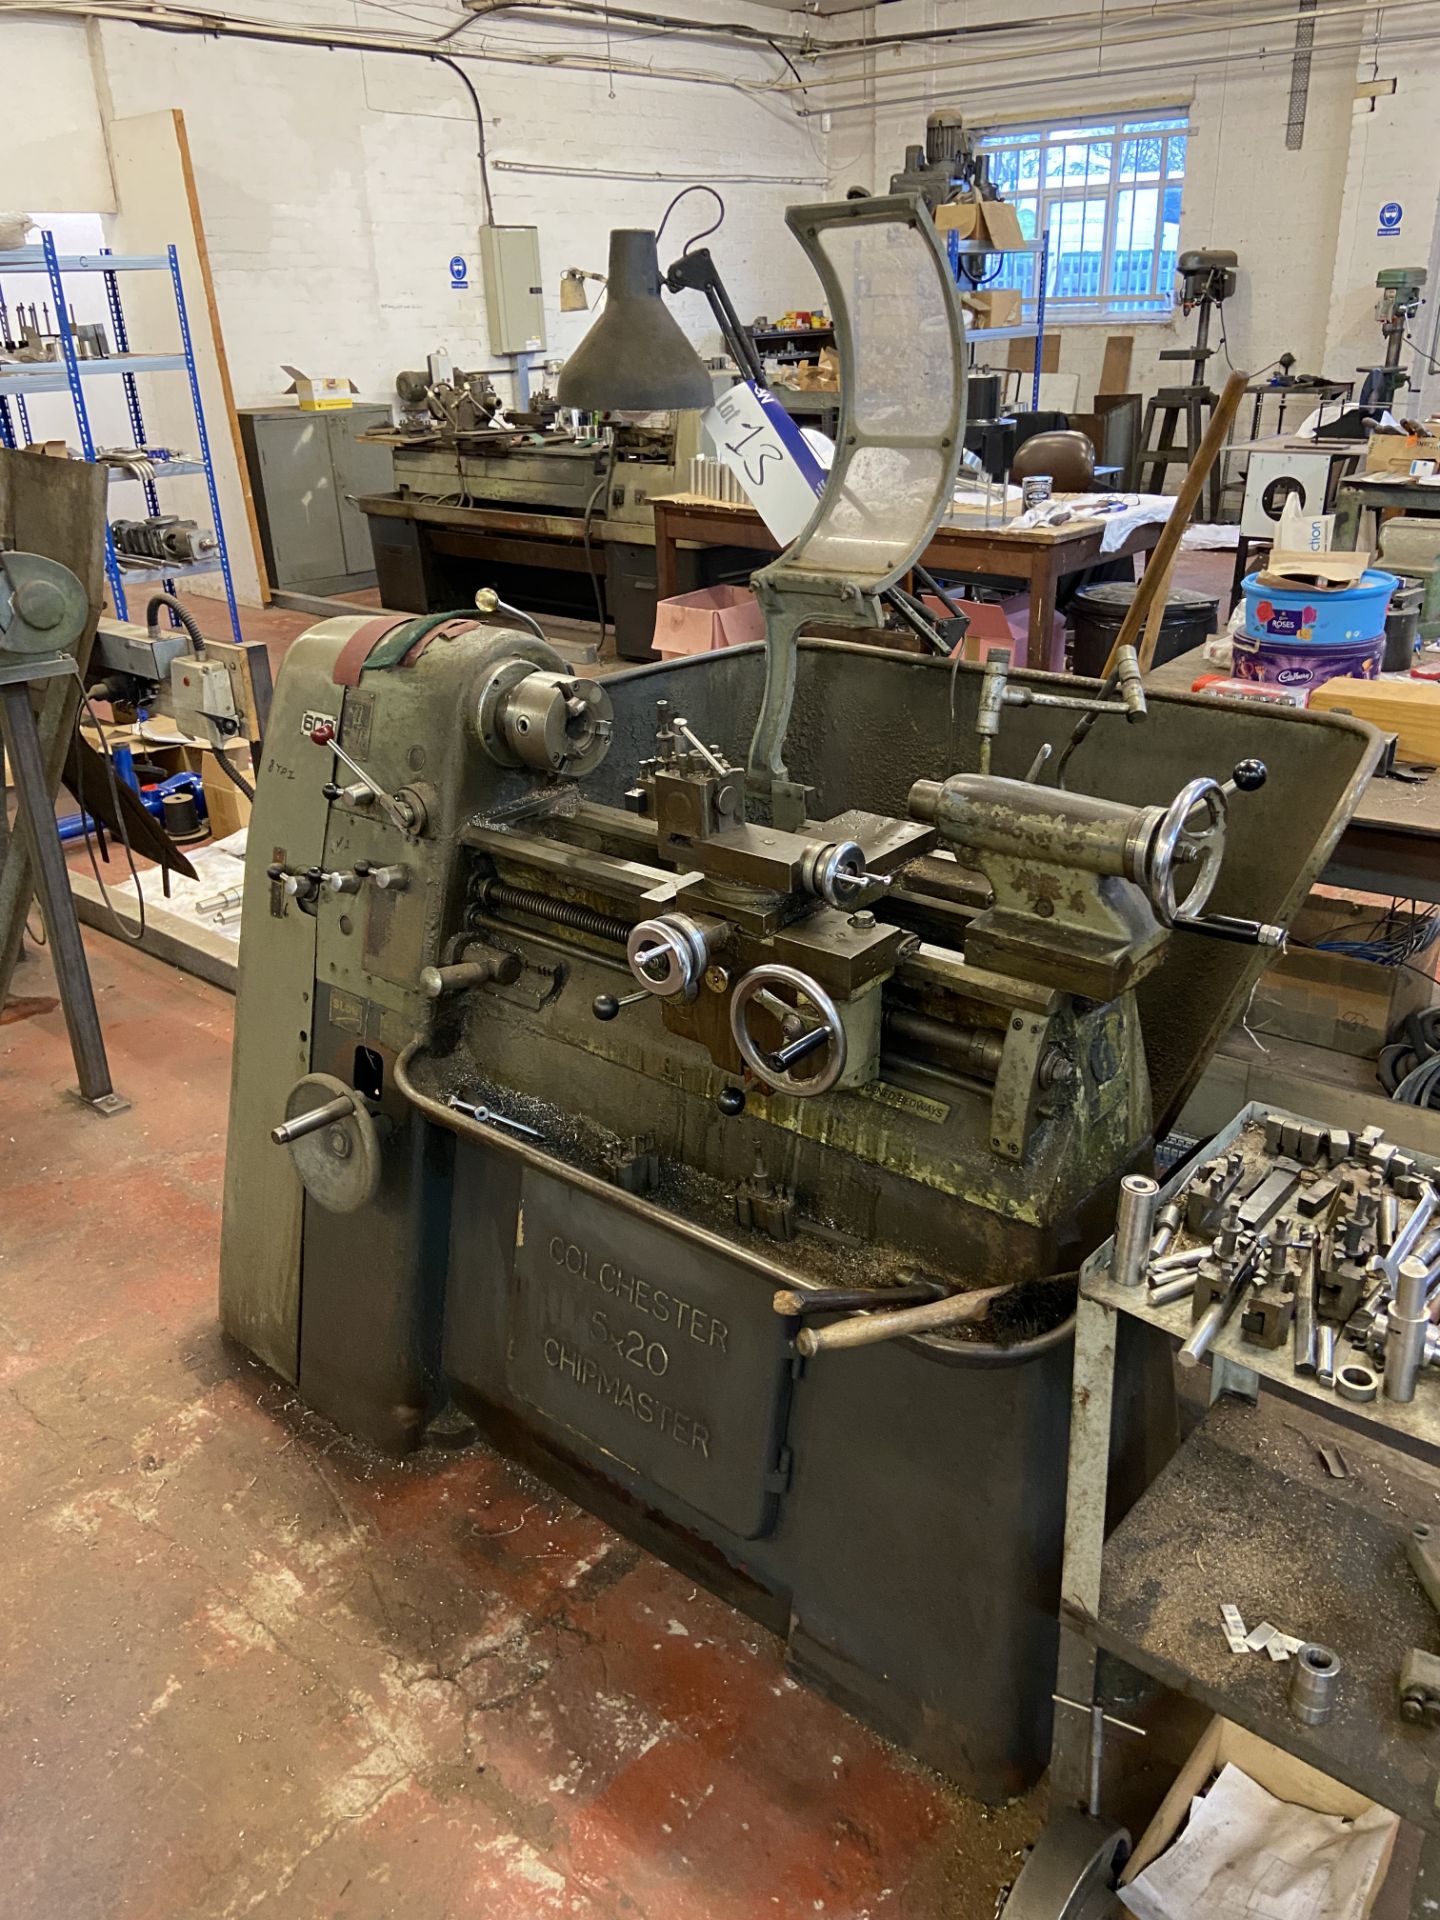 Colchester CHIPMASTER 5 x 20 CENTRE LATHE, serial no. F/6649, 440V, approx. 300mm swing over bed, - Bild 2 aus 6